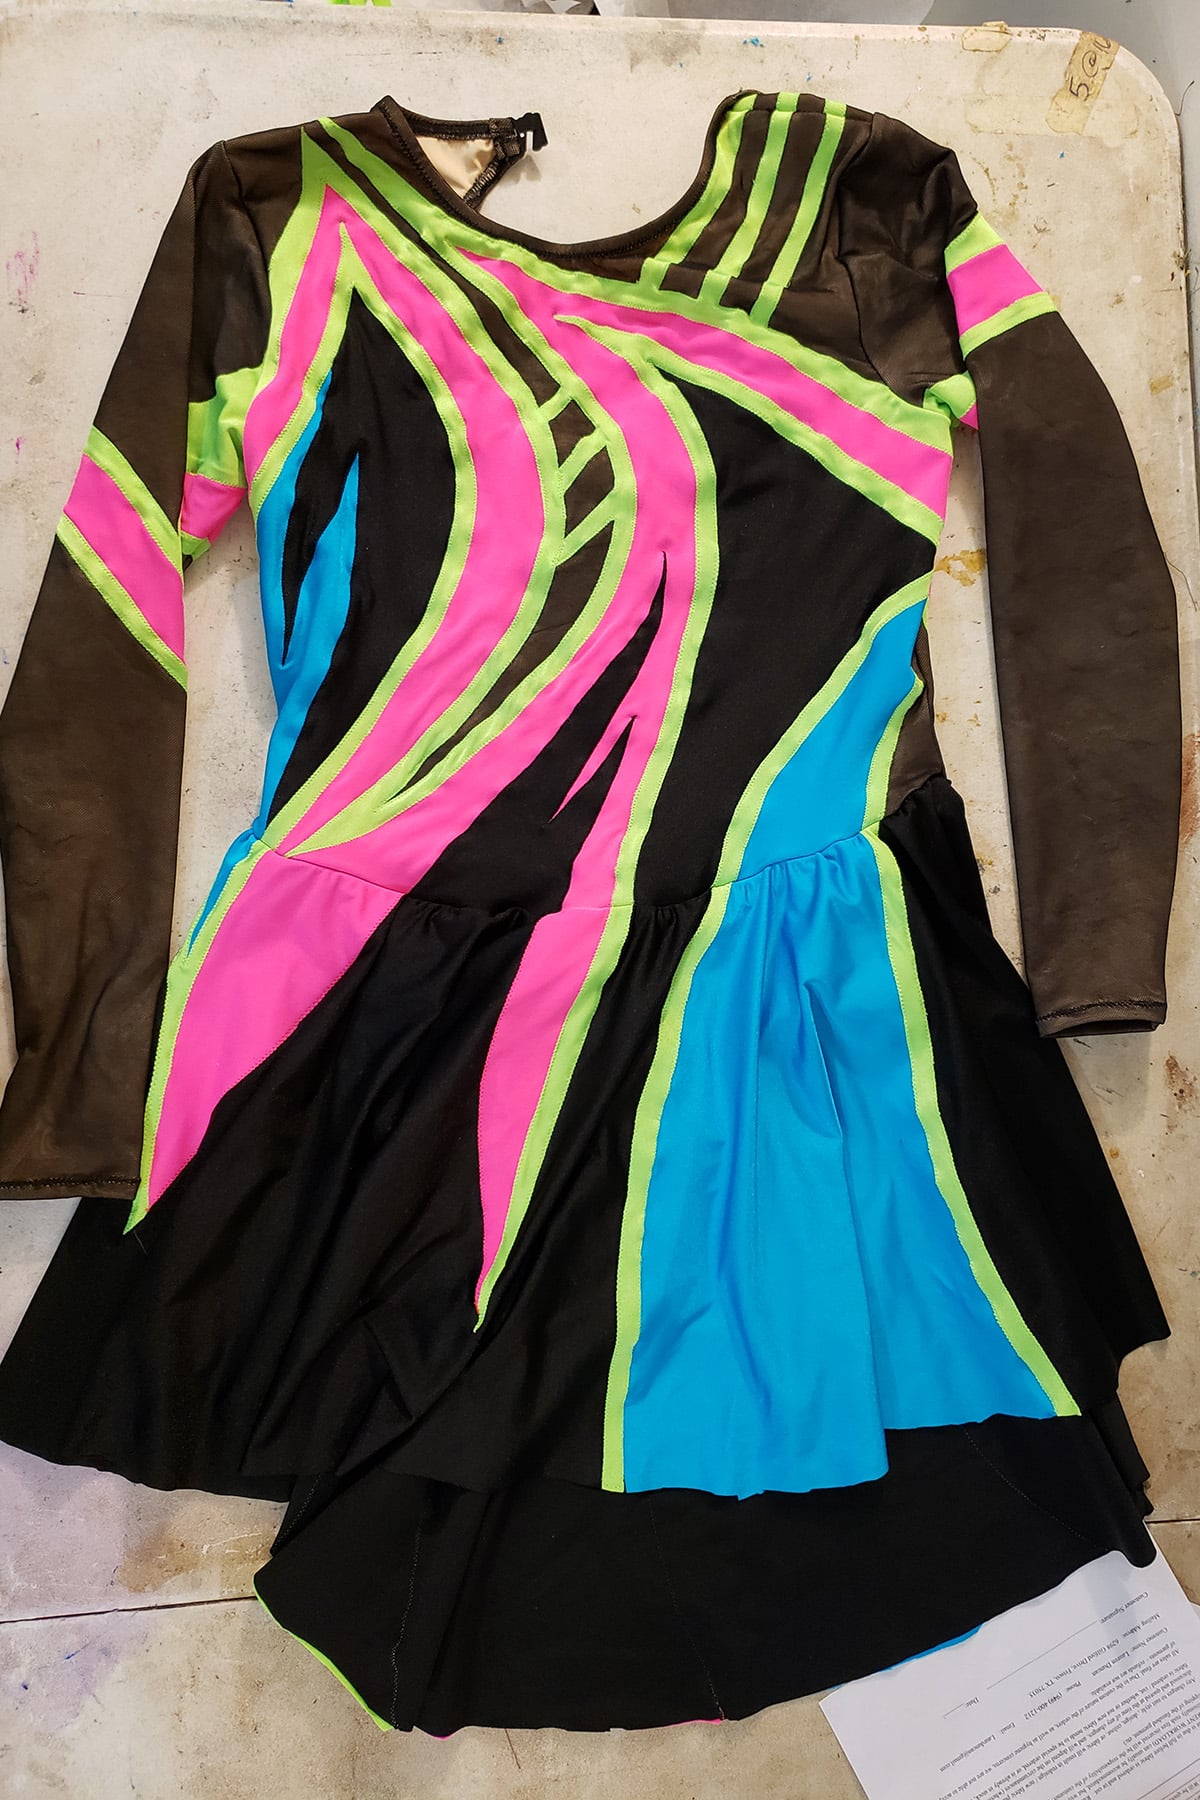 A front view of the 80's themed figure skating dress. It is black spandex and black mesh, with swirls of neon pink, lime green, and sky blue on it.